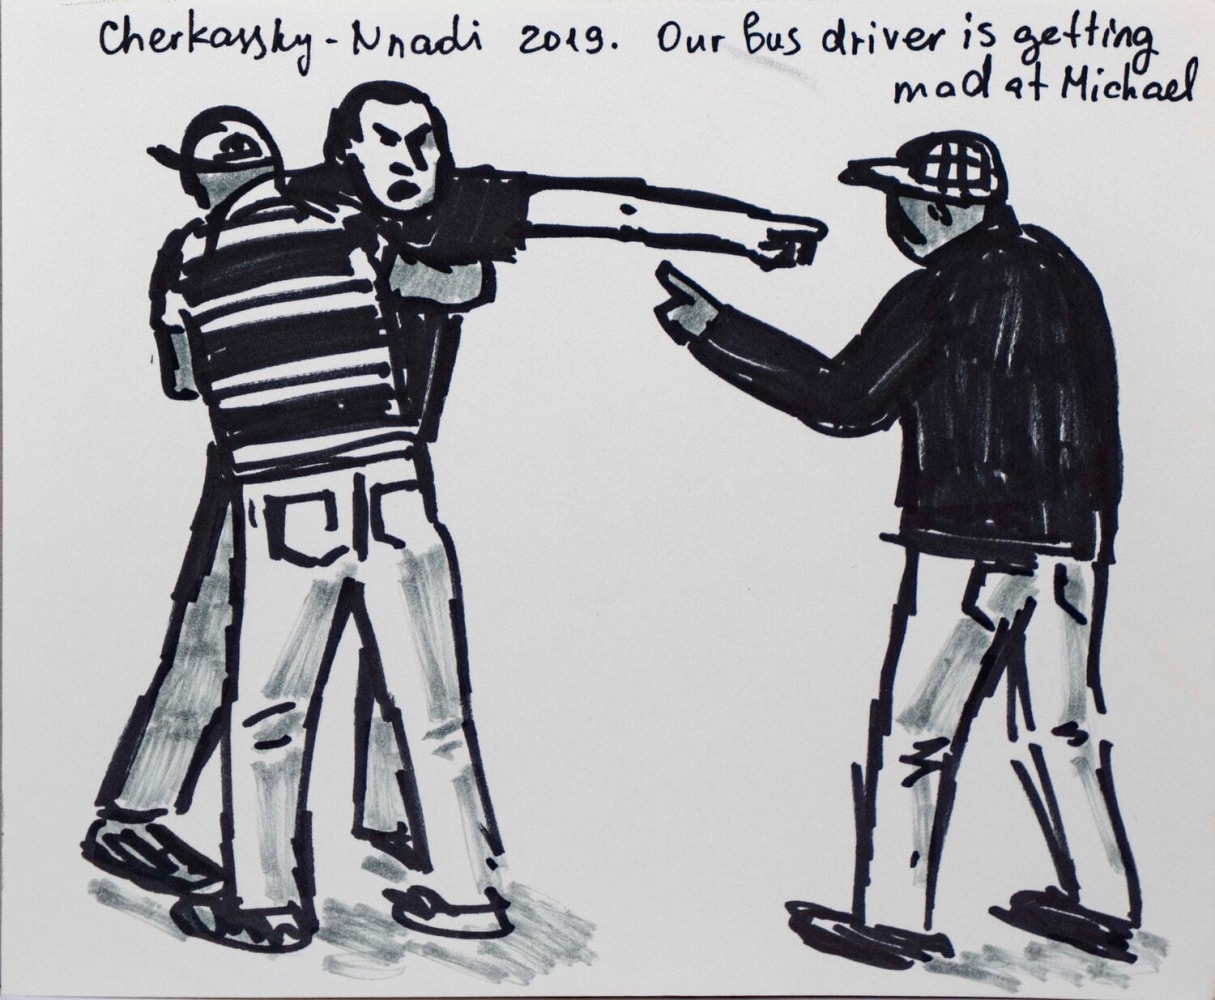 Zoya Cherkassky
Our Bus Driver is Getting Mad at Michael, 2019
Markers on paper
5.5&amp;nbsp;x 6.5&amp;nbsp;inches